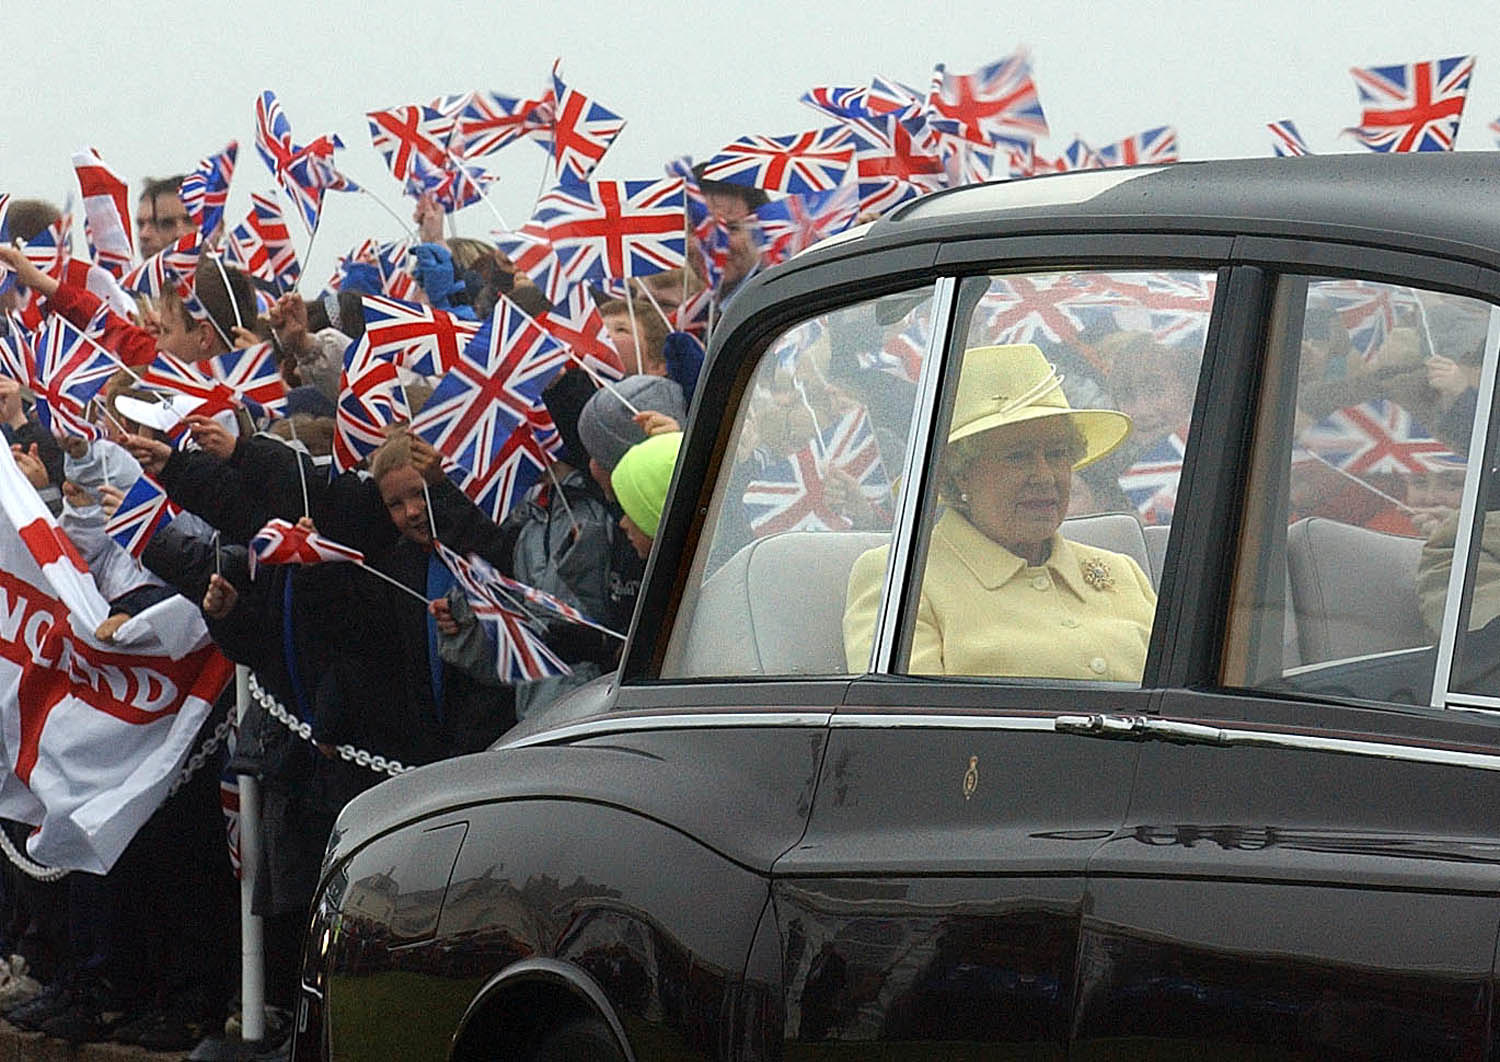 The queen in a car with a ton of people waving union jack flags surrounding her